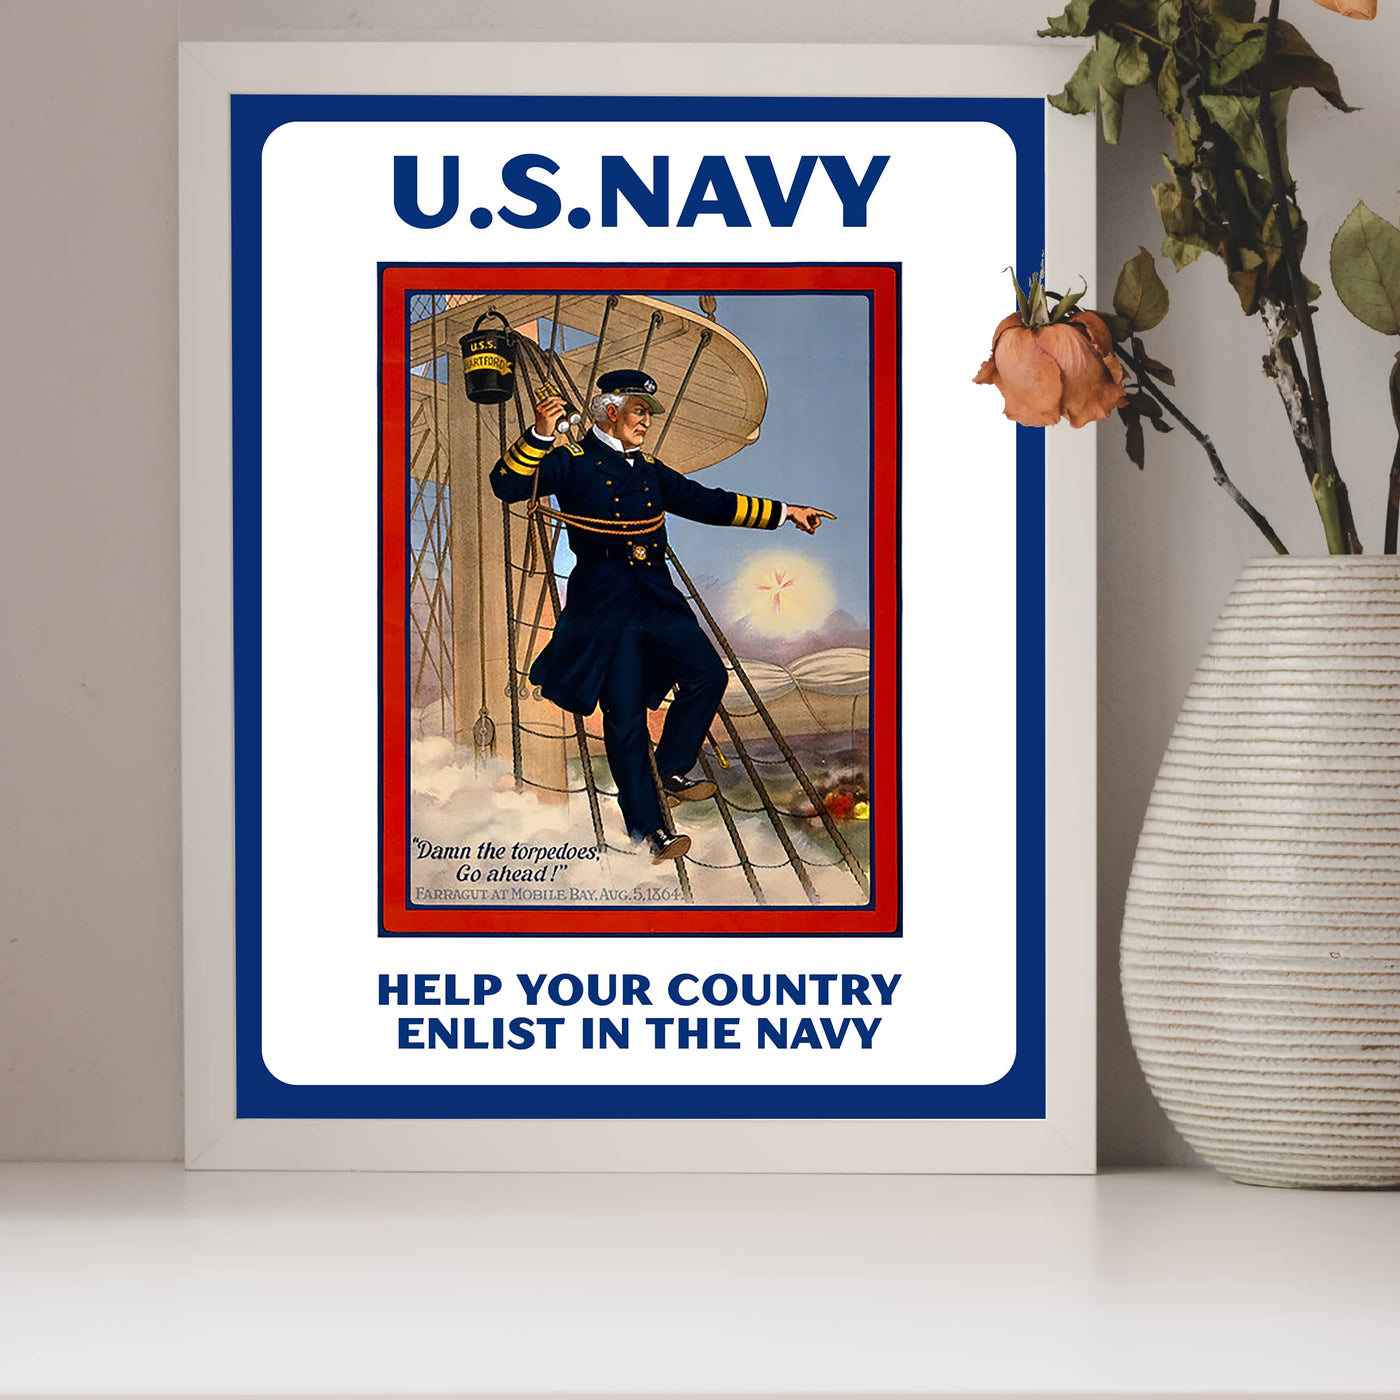 US Navy -Help Your Country- Enlist Vintage US Navy Recruitment Wall Art Sign- 8 x 10" Nautical Retro Navy Print -Ready To Frame. American Military Decor for Home-Office-Garage-Bar-Man Cave Decor!